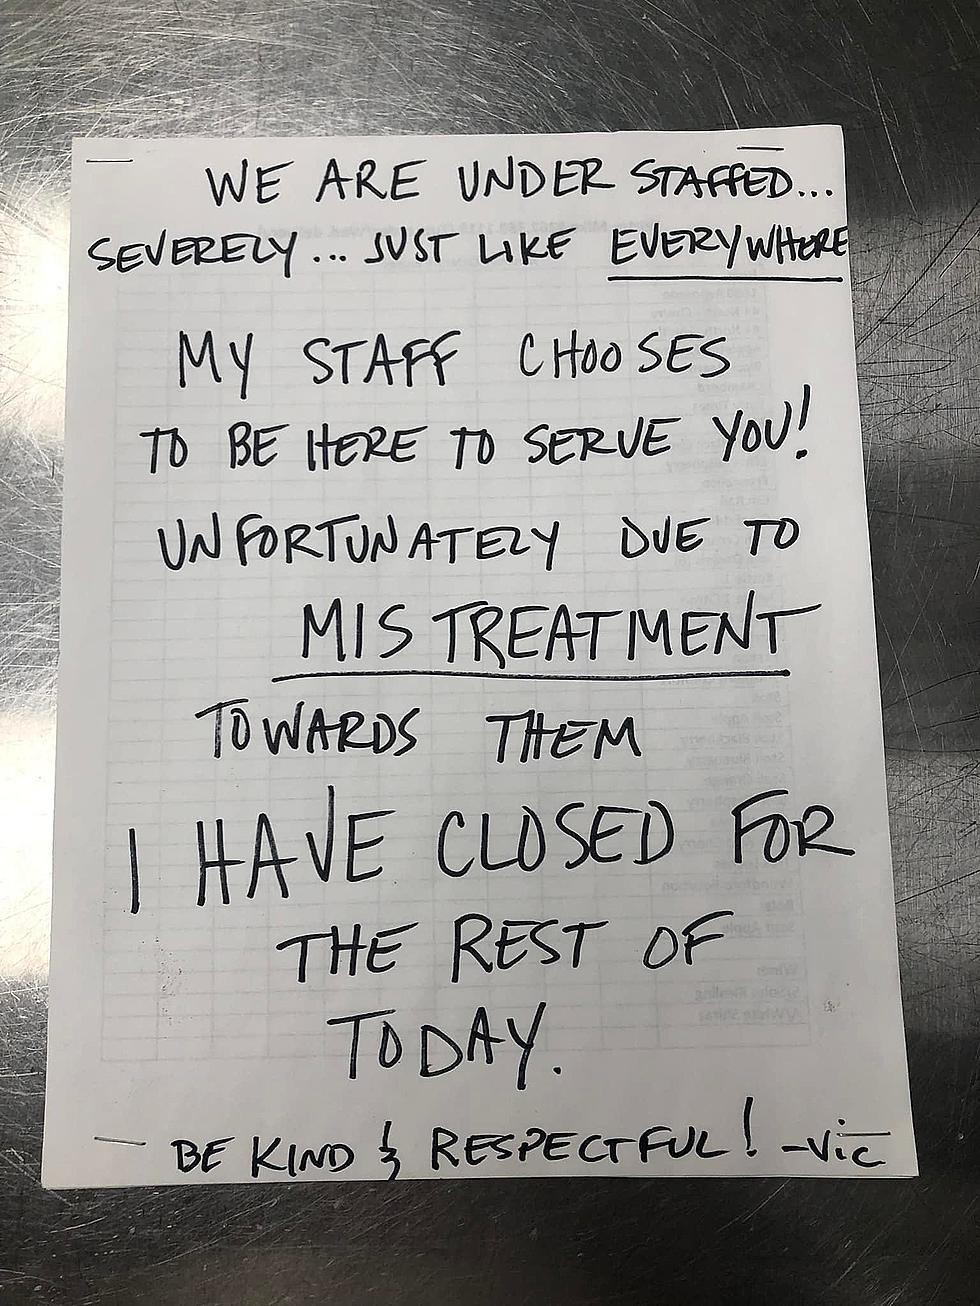 Too Many Rude Customers Forced One Wisconsin Diner to Temporarily Close